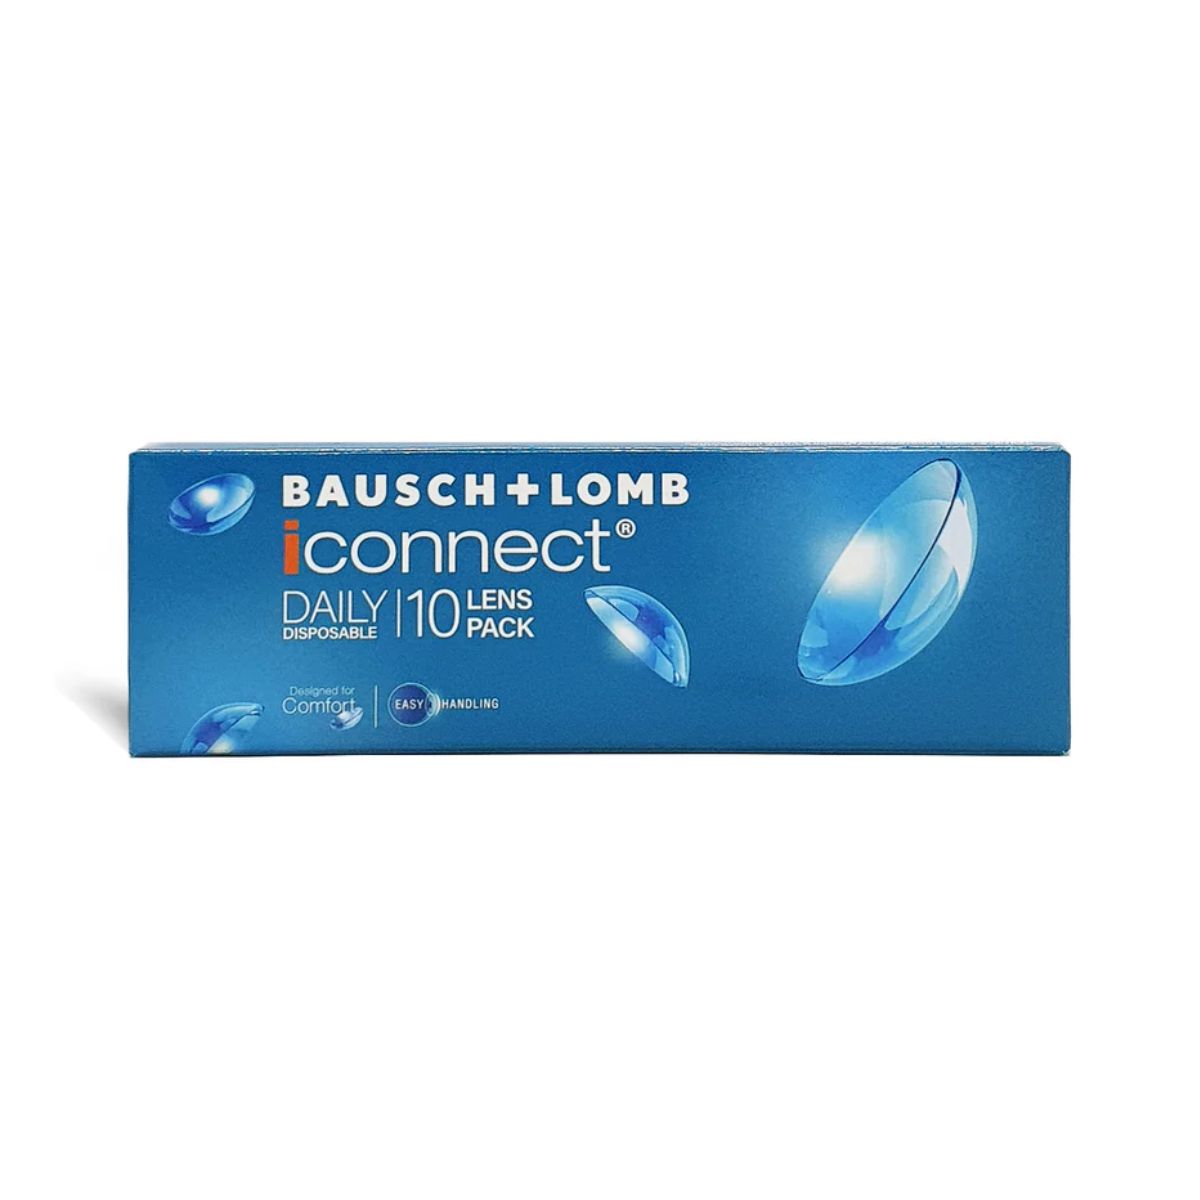 "Bausch & Lomb Iconnect Daily Disposable | Hydrogel Contact Lenses"